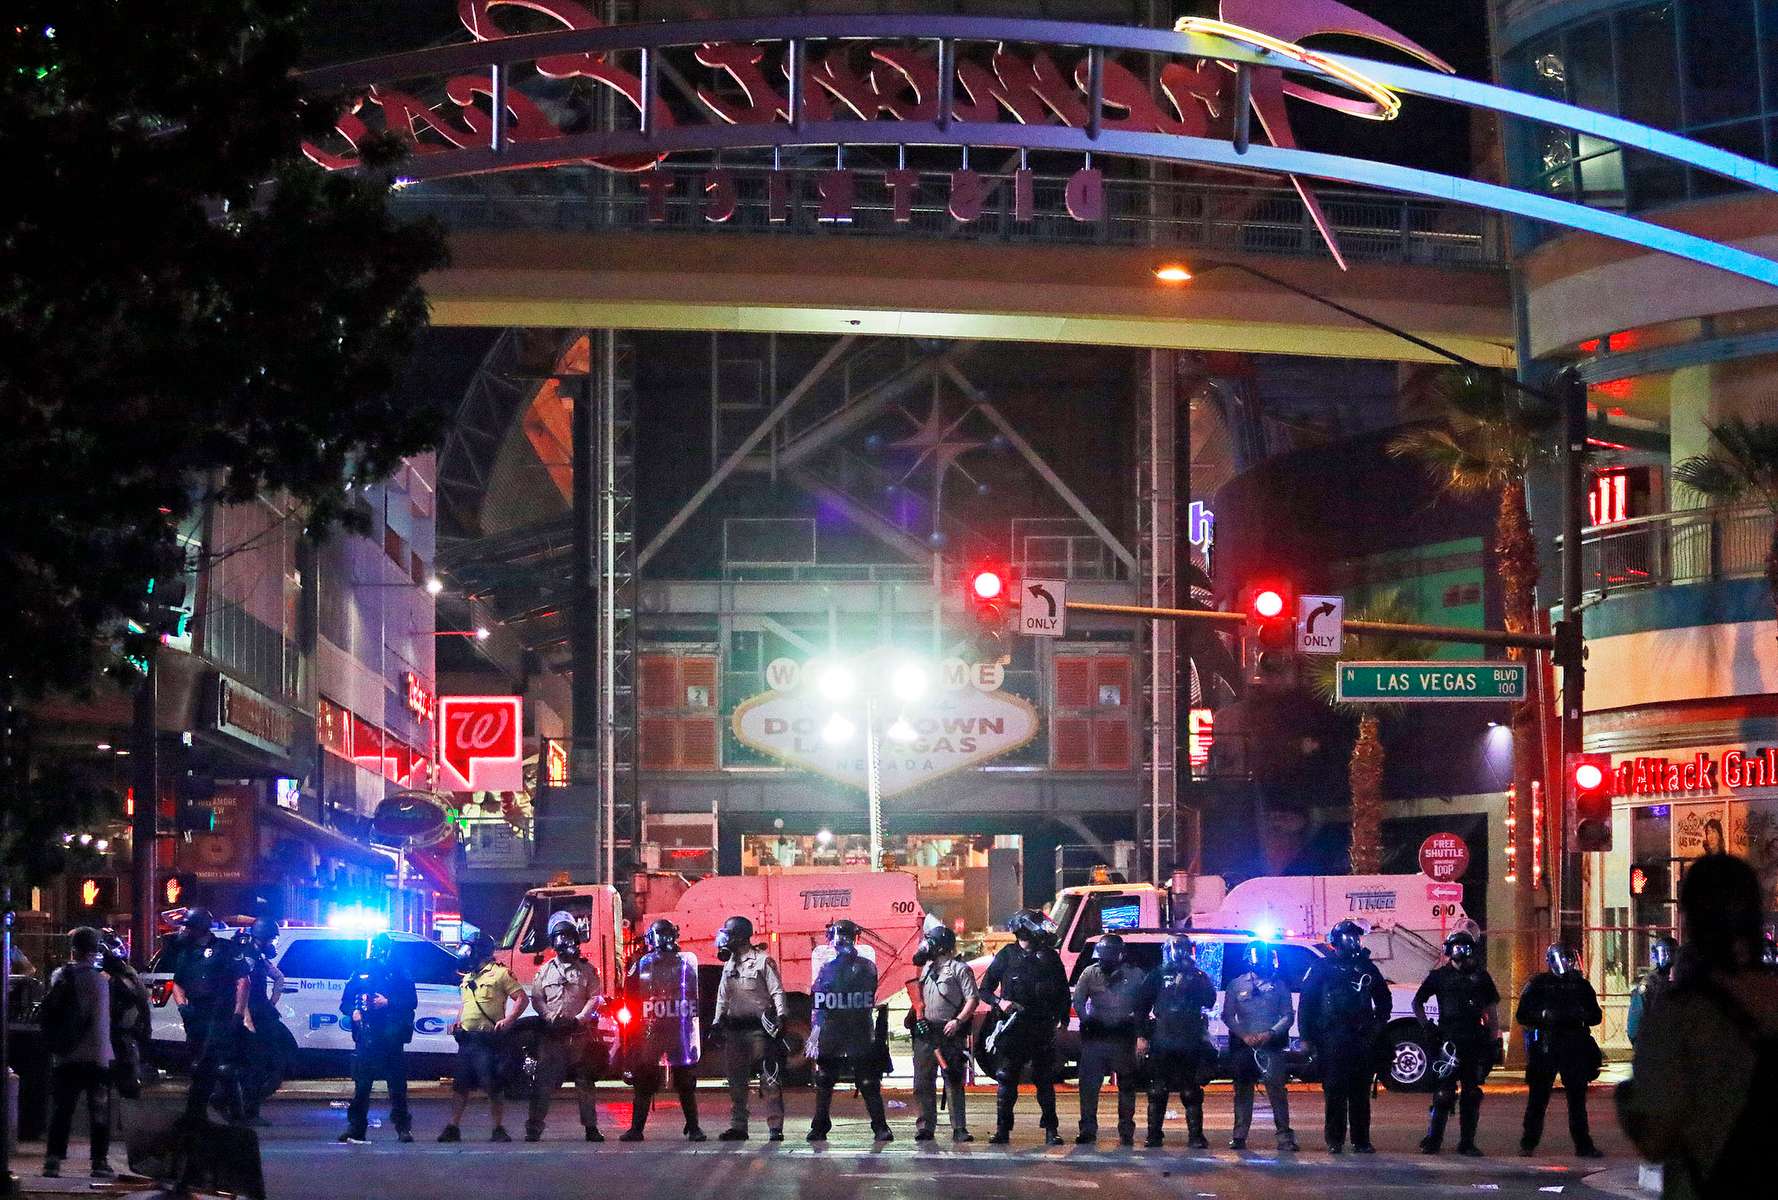 Police stand in formation at the entrance to Fremont Street Experience in downtown Las Vegas. Police were present for a community protest over the death of George Floyd, a Minneapolis man that died in police custody on Memorial Day. (Ronda Churchill/AP Photos)